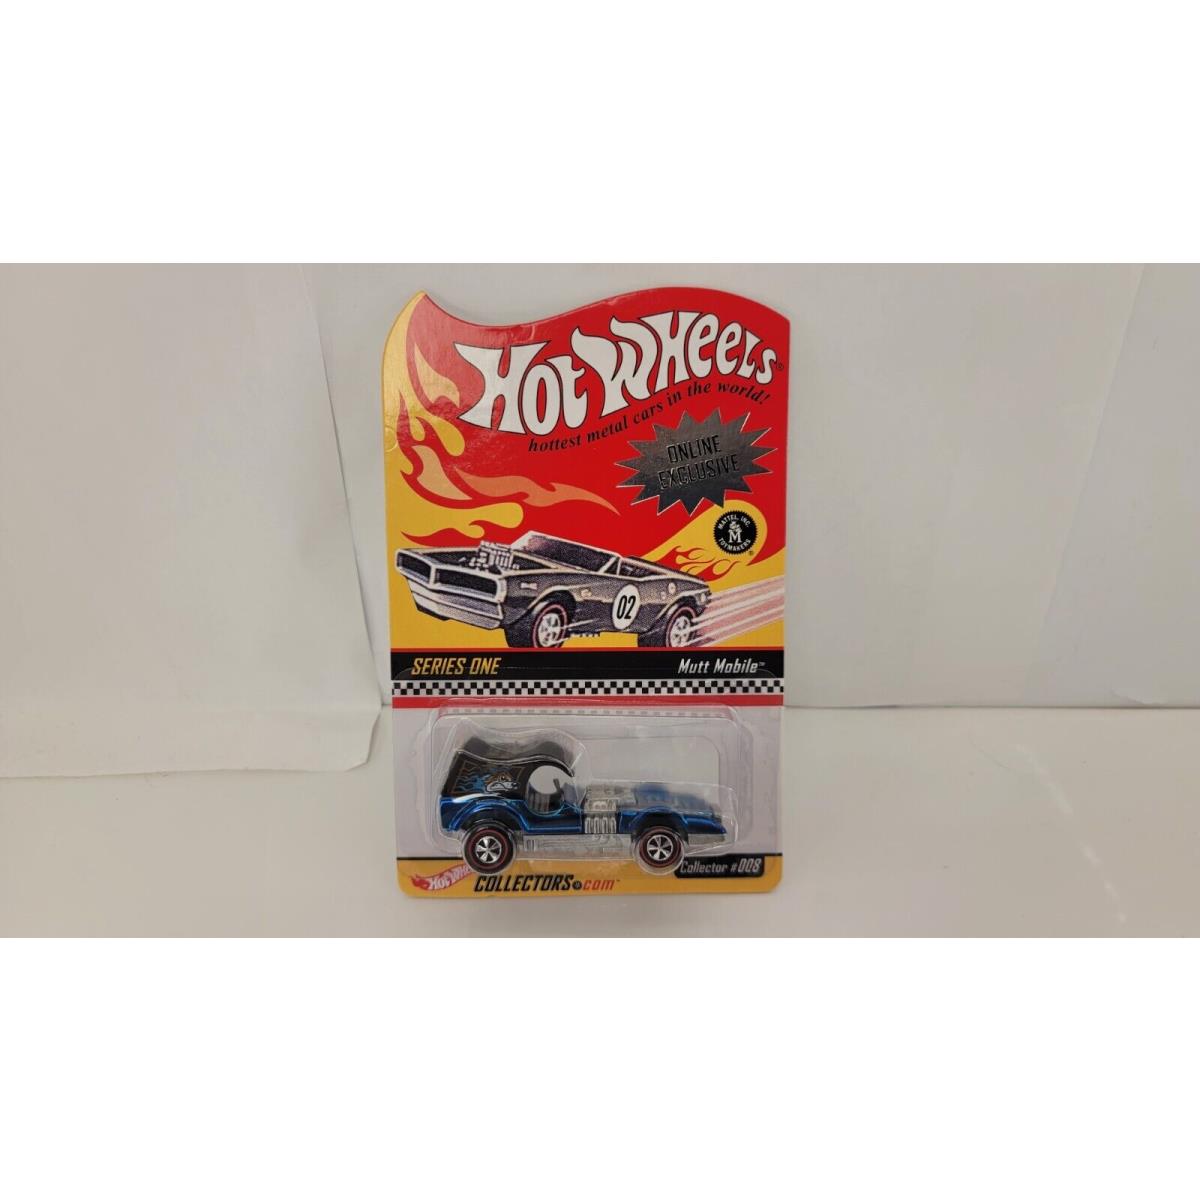 Mutt Mobile Blue Online Exclusive Series One 2002 Hot Wheels 05723 China KT99